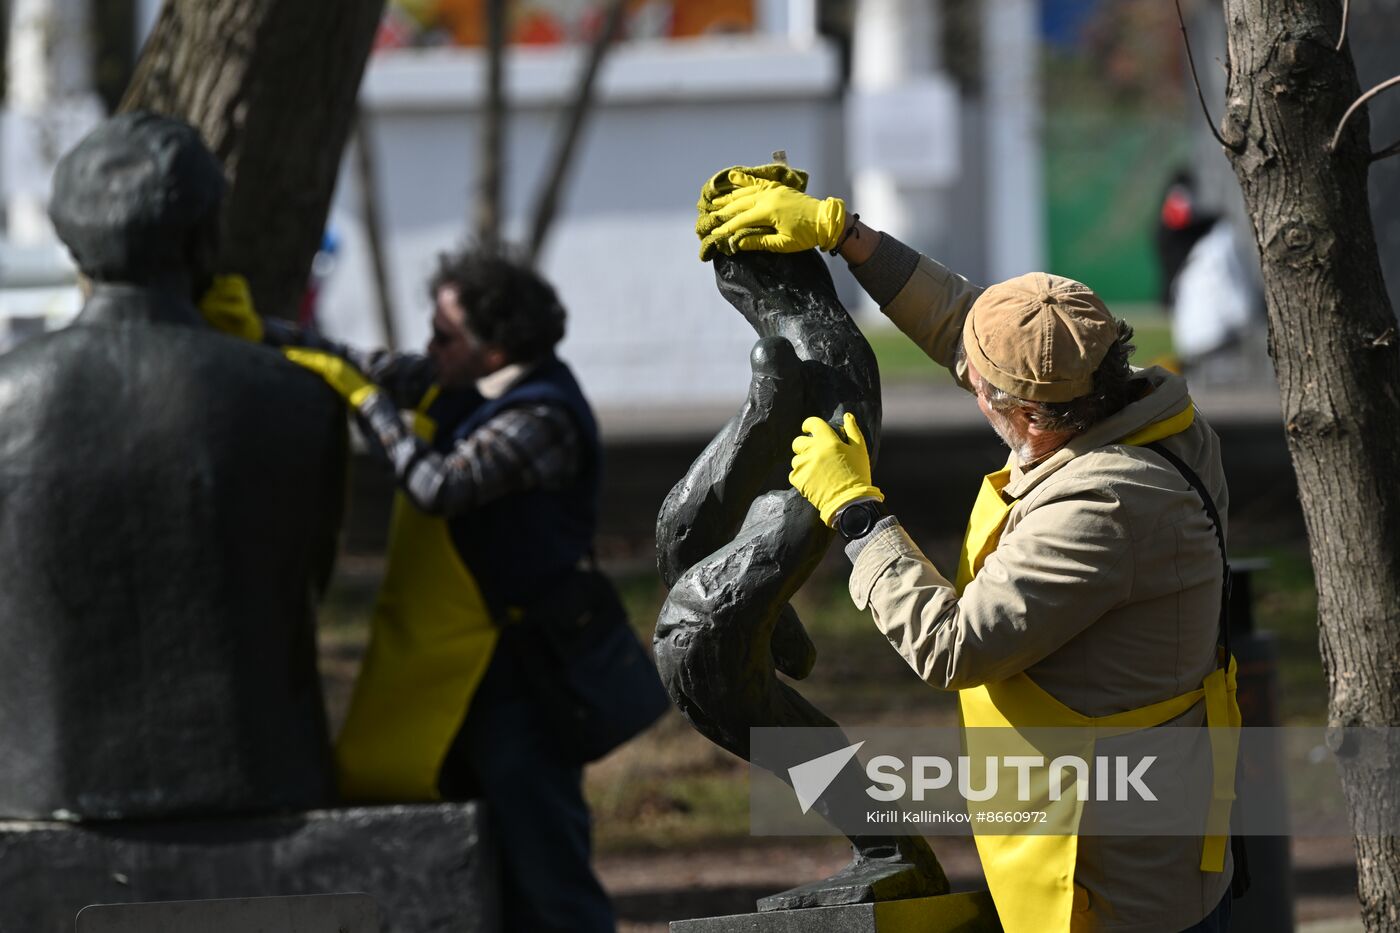 Russia Spring Season Clean Up Campaign